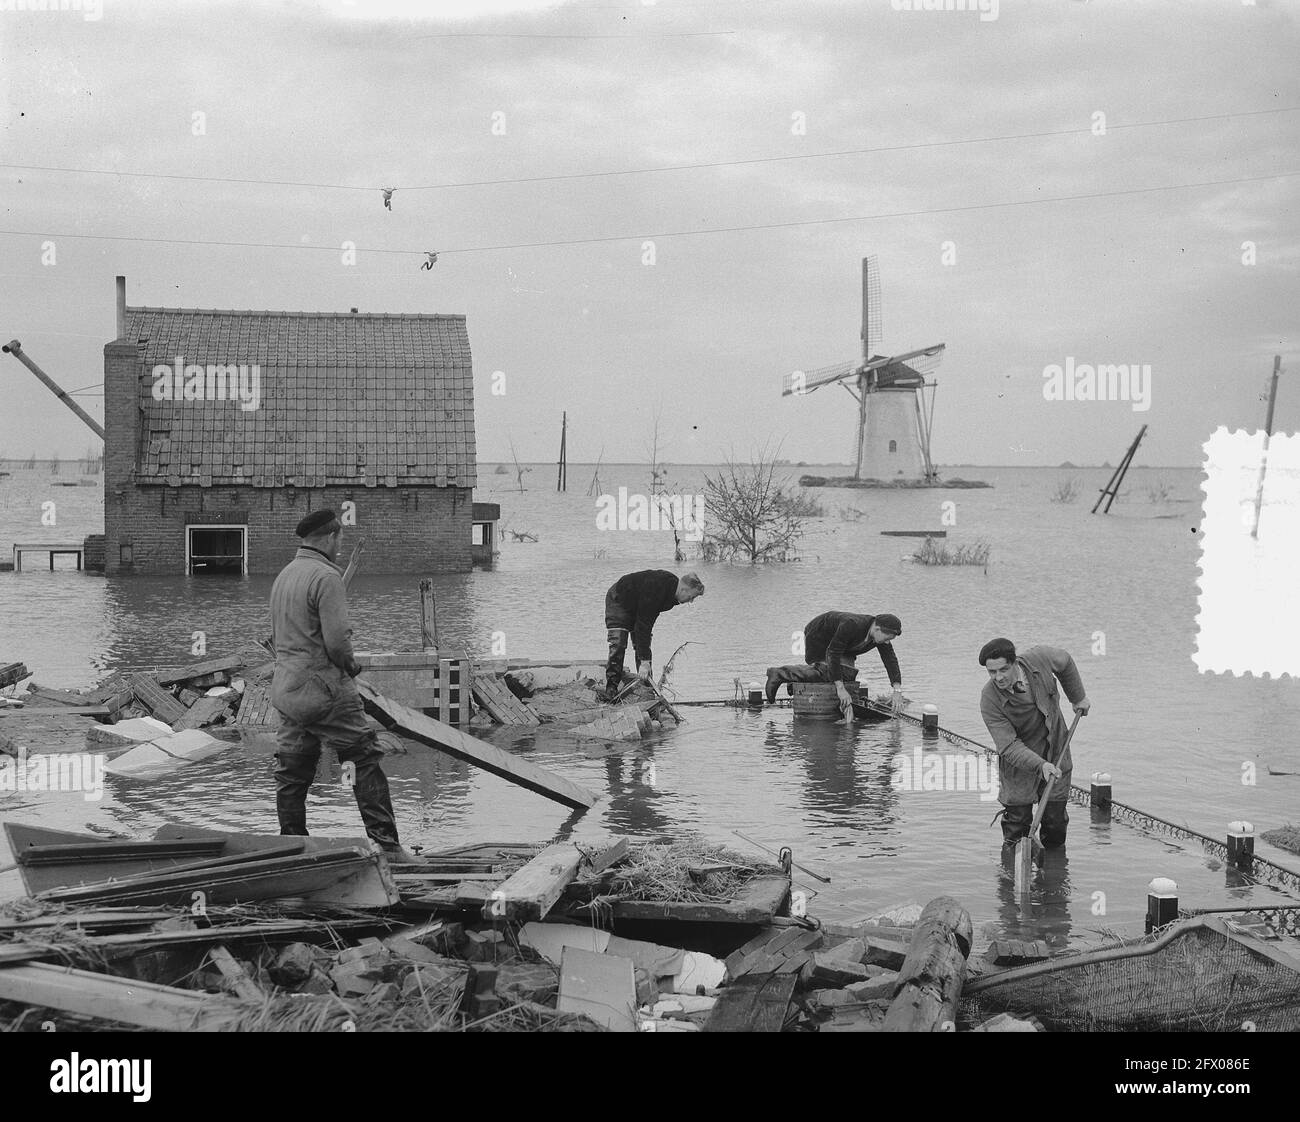 Schouwen Duiveland Nieuwerkerk . Clearance plates, April 2, 1953, floods, The Netherlands, 20th century press agency photo, news to remember, documentary, historic photography 1945-1990, visual stories, human history of the Twentieth Century, capturing moments in time Stock Photo